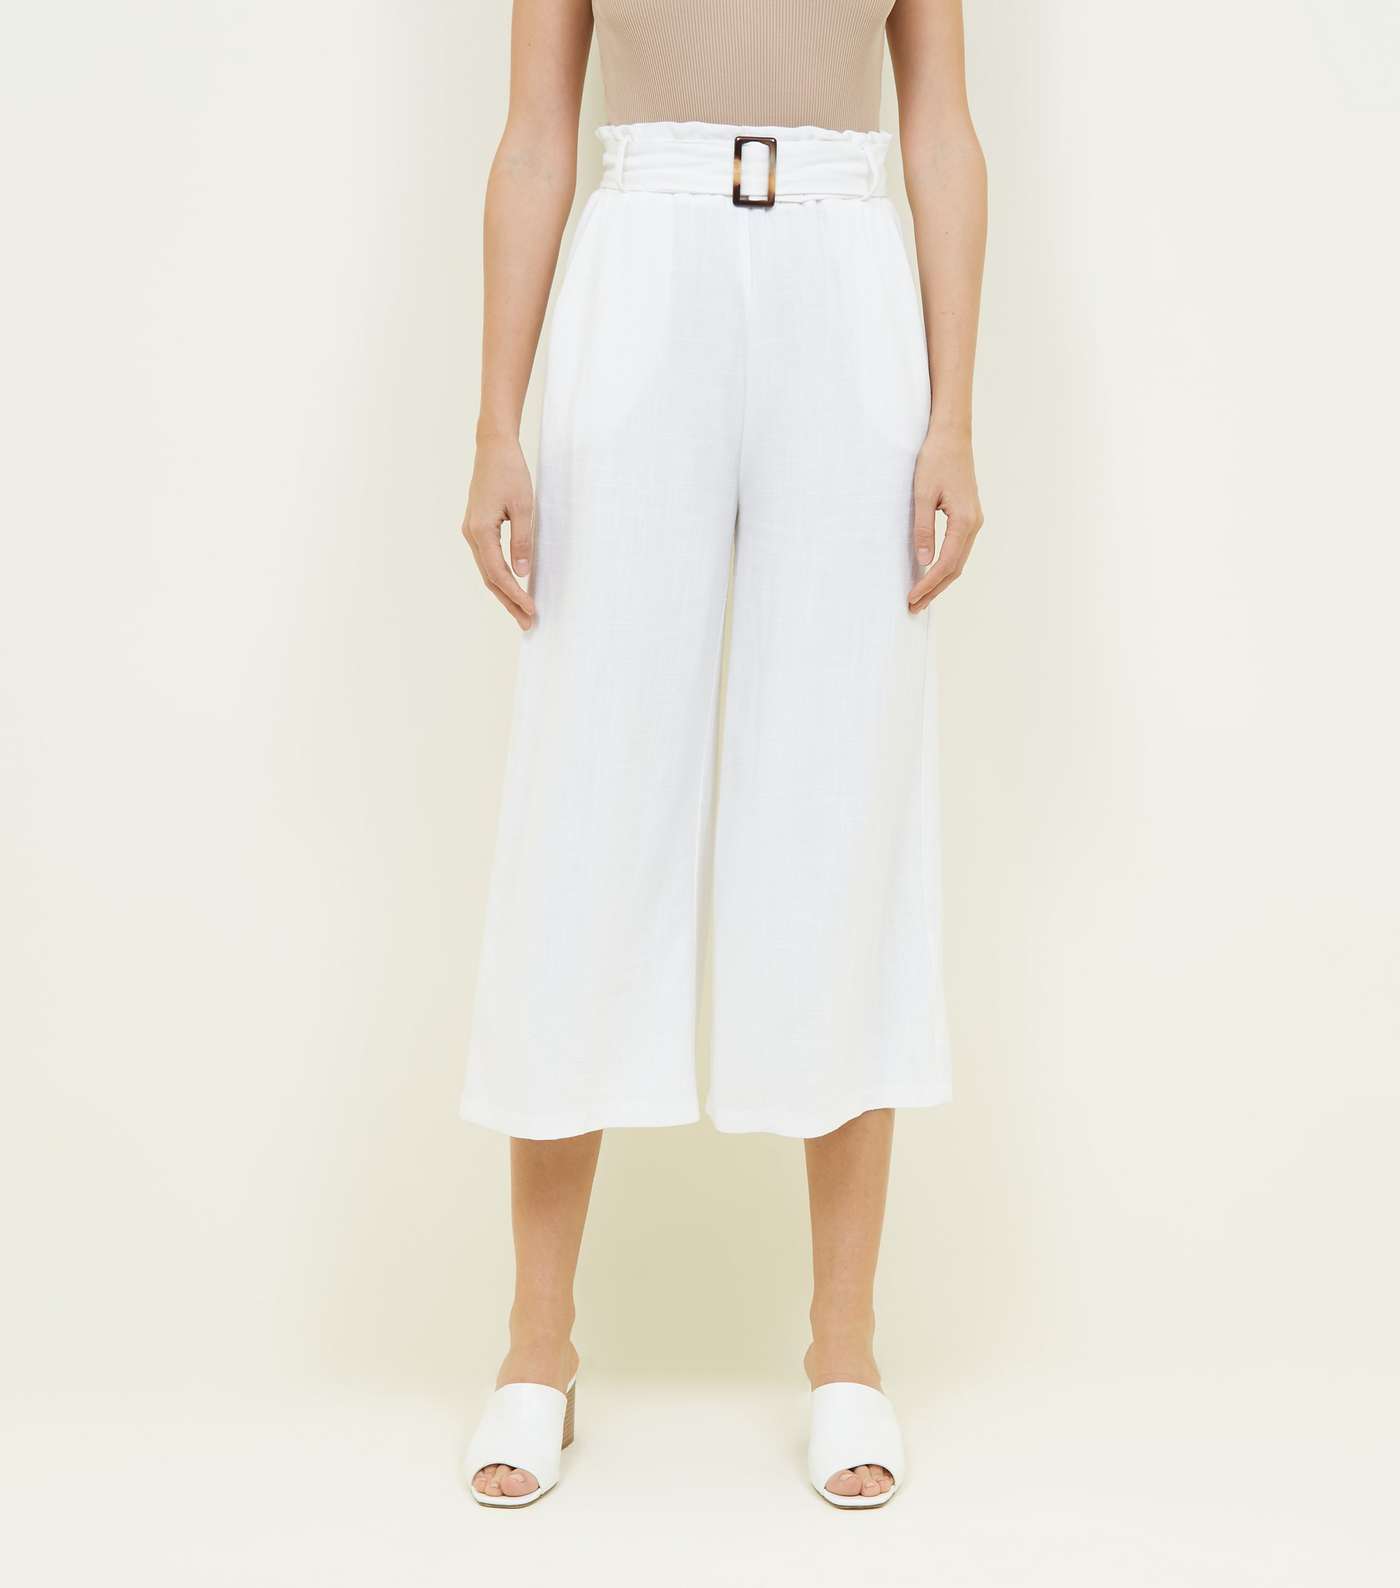 White Linen-Look Belted Culottes Image 2